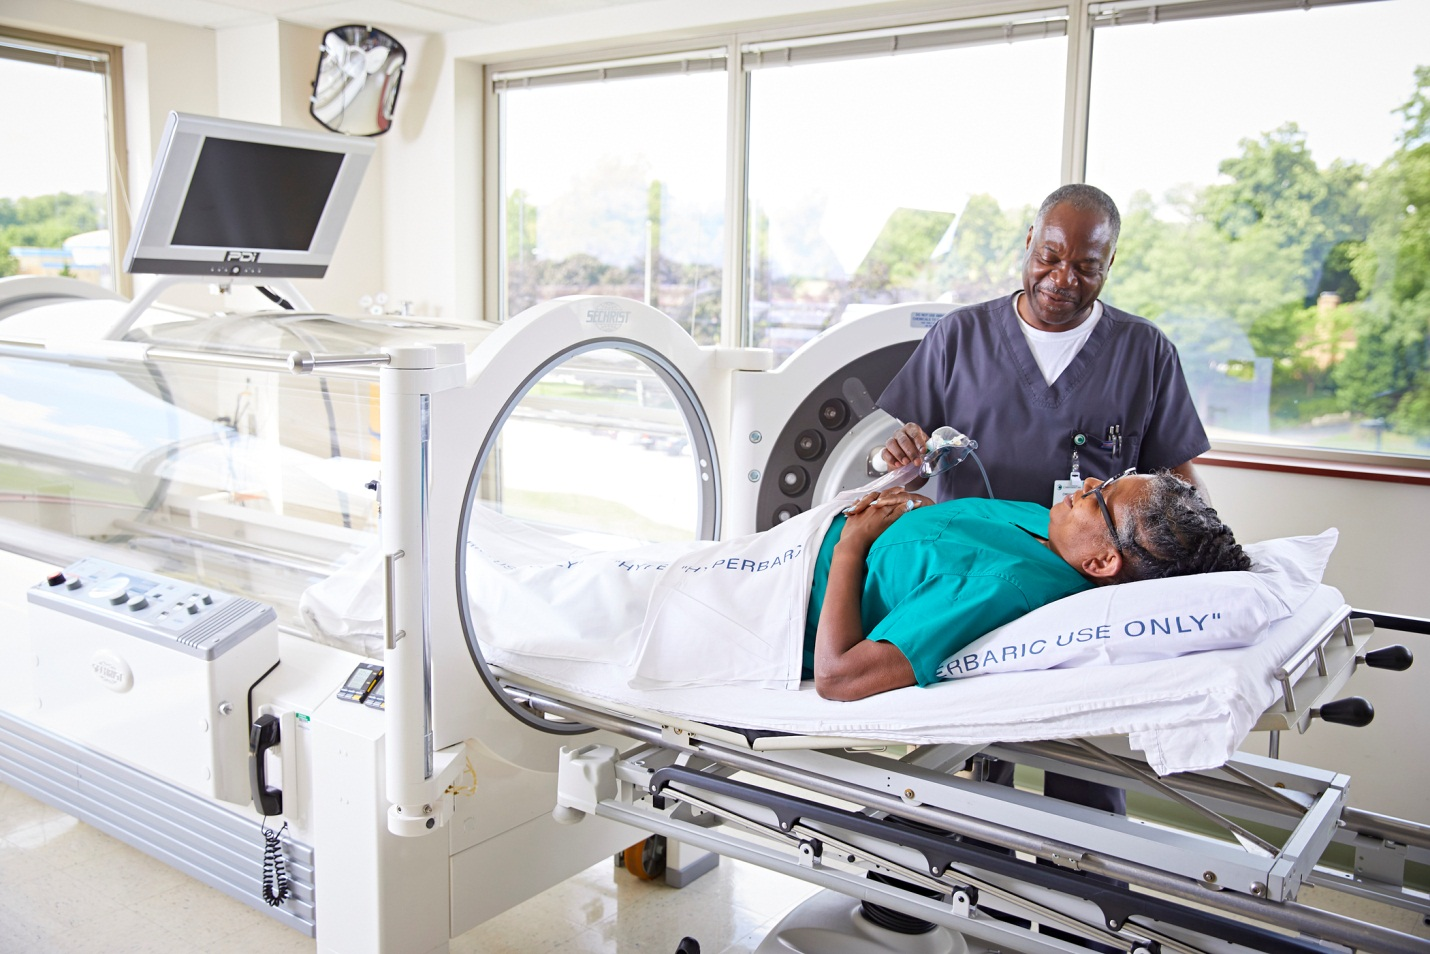 How does hyperbaric oxygenation therapy work for adults?